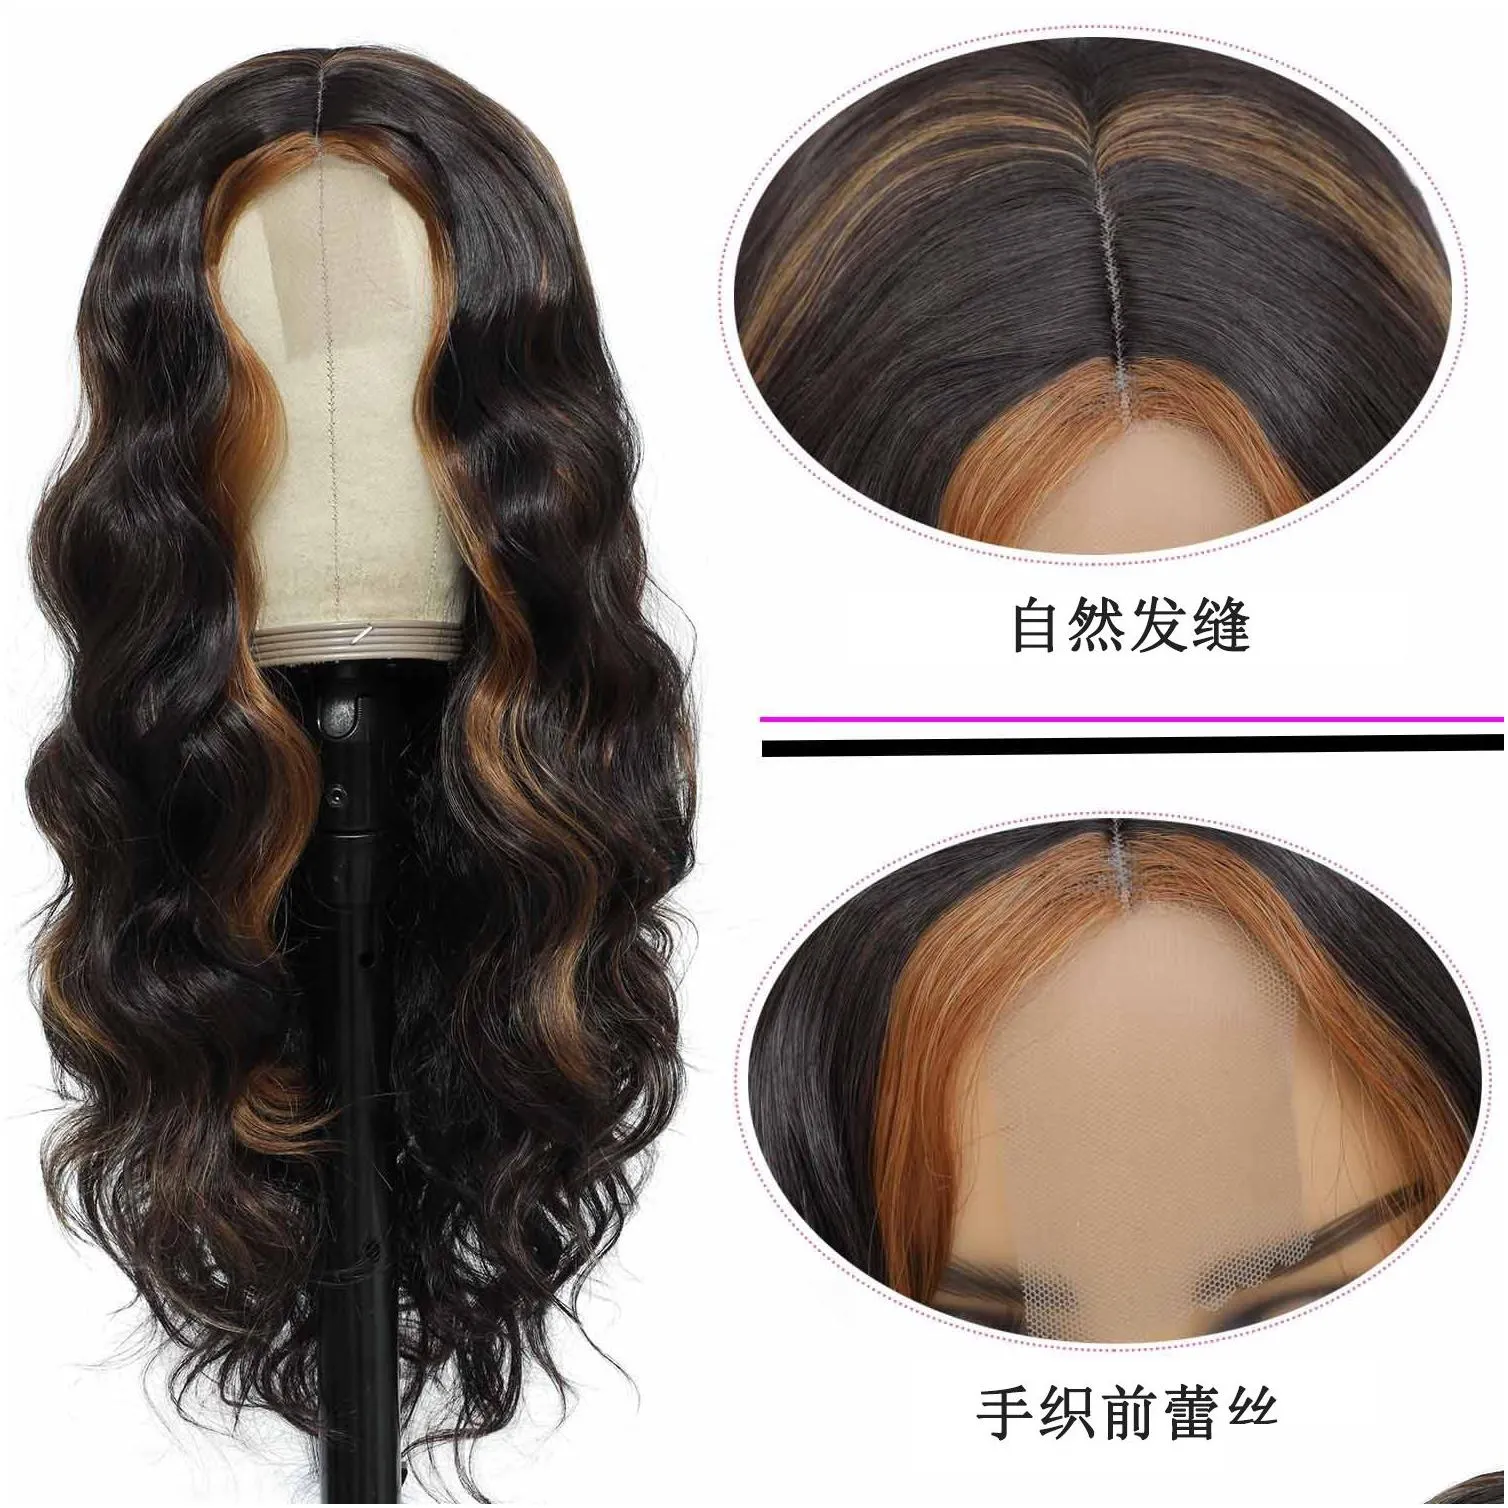 Wig Caps Wholesale Prices Premier Highlight Color Virgin Hair Natural Wave 360 Lace Human Frontal With Baby Fast Ship Drop Delivery Pr Dh7Fq